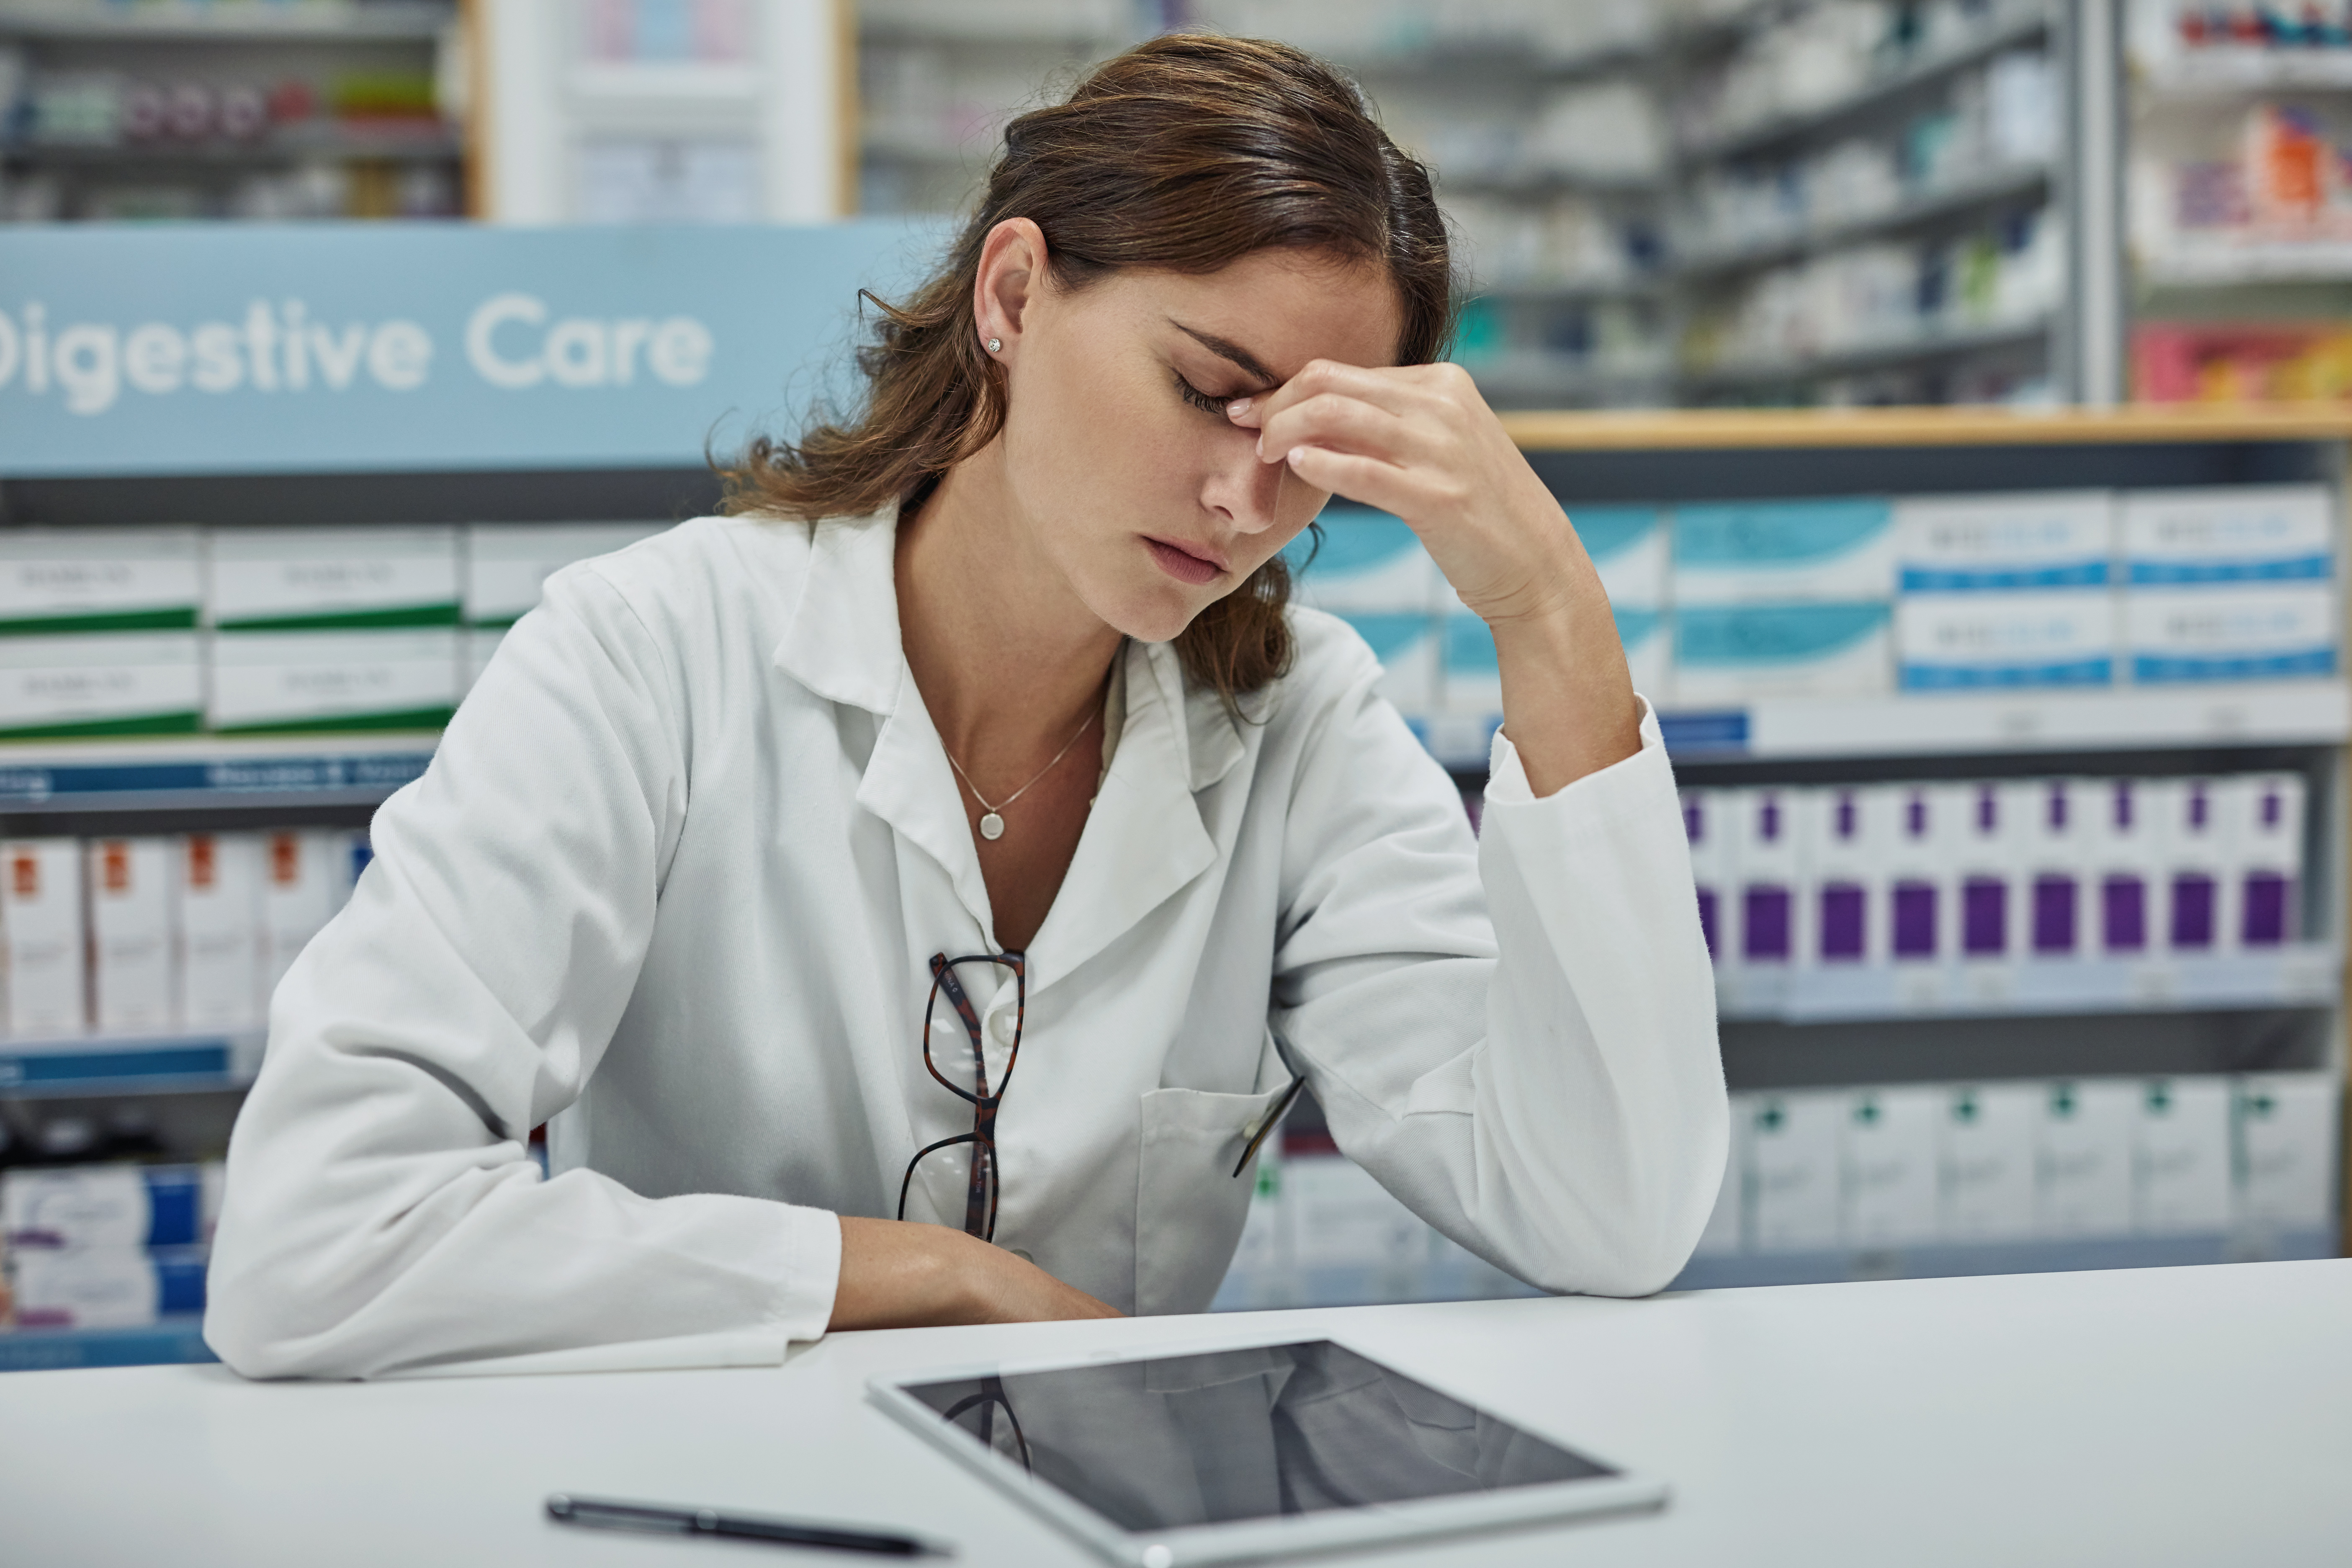 Your Pharmacy Software is Sunsetting: What's Next?